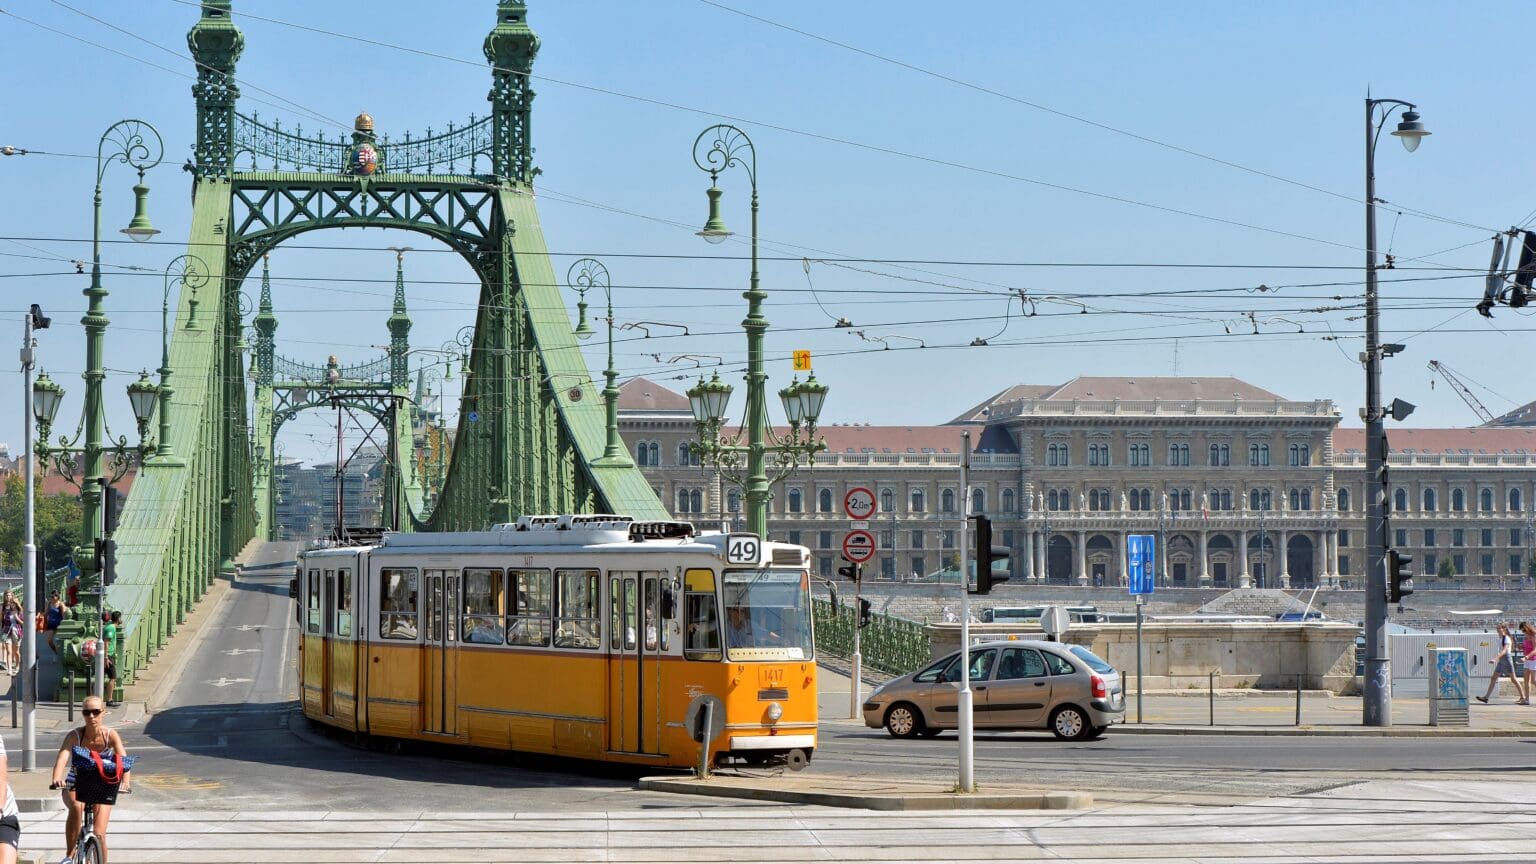 Tram Network Between Buda and Pest Re-connected 77 Years Ago